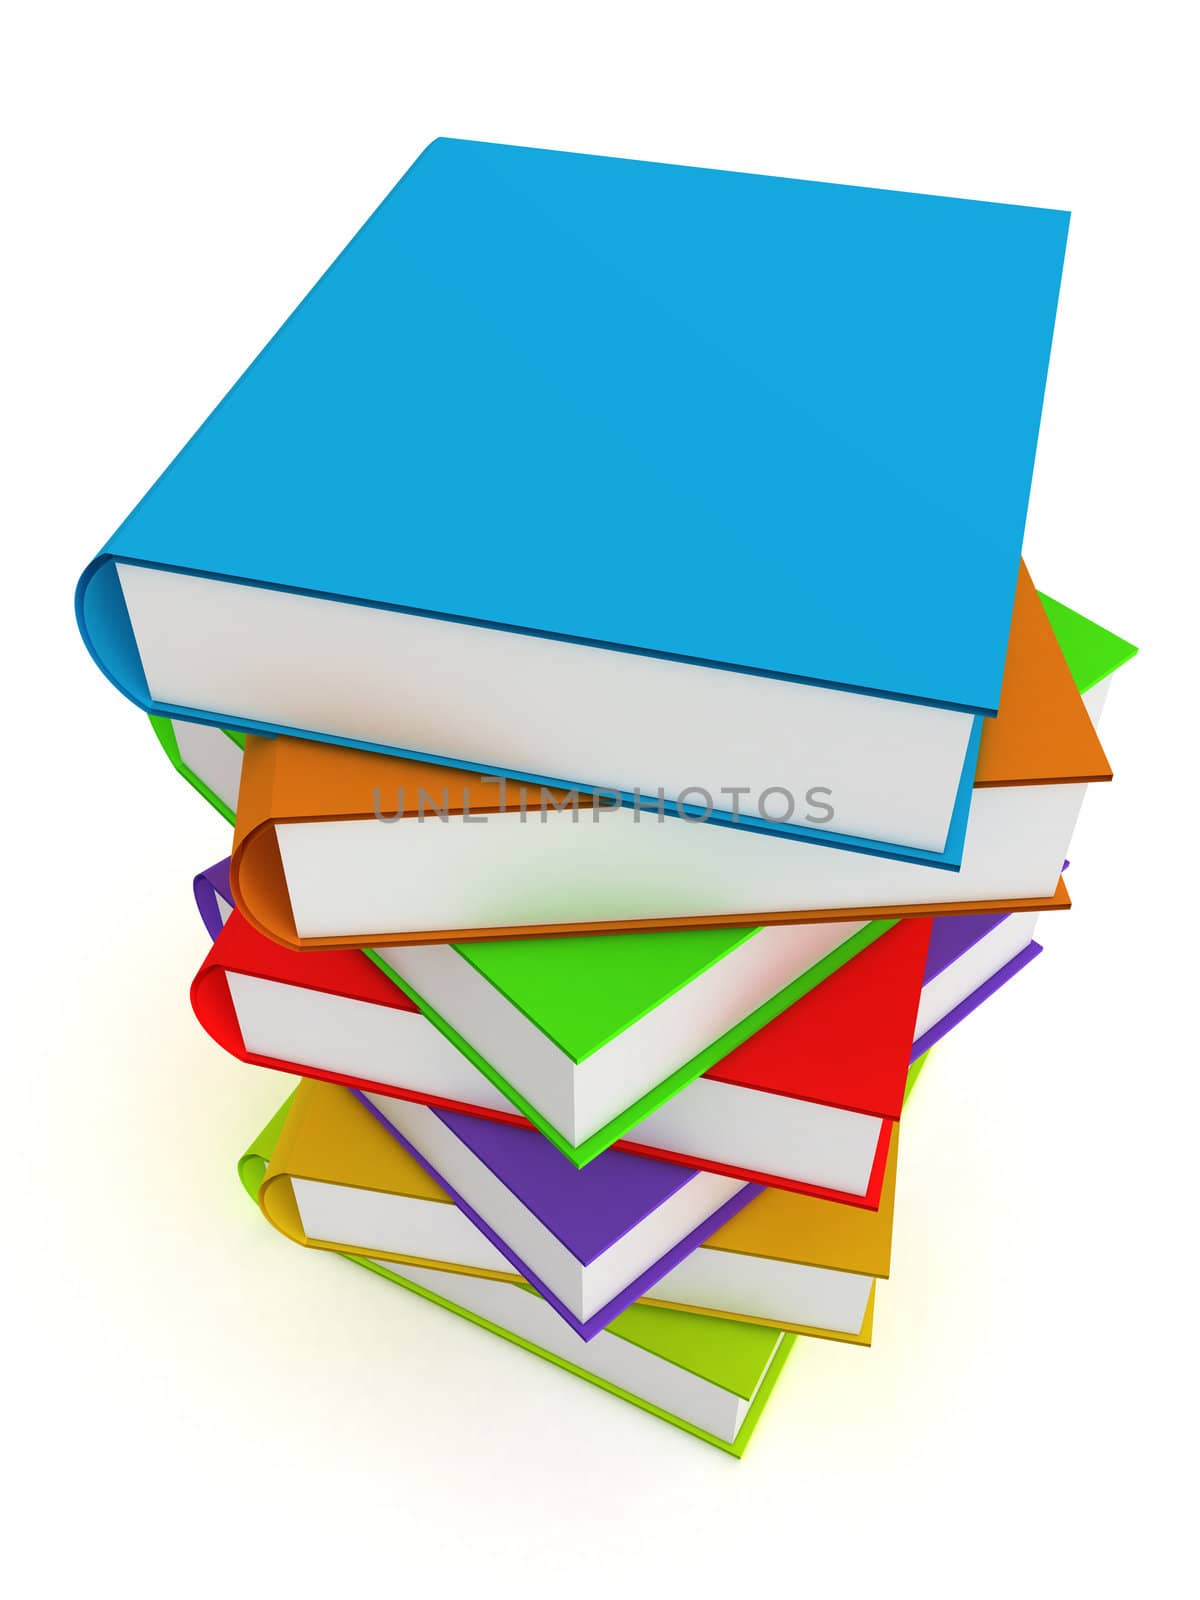 A Colourful 3d Rendered Illustration of a Stack of Books